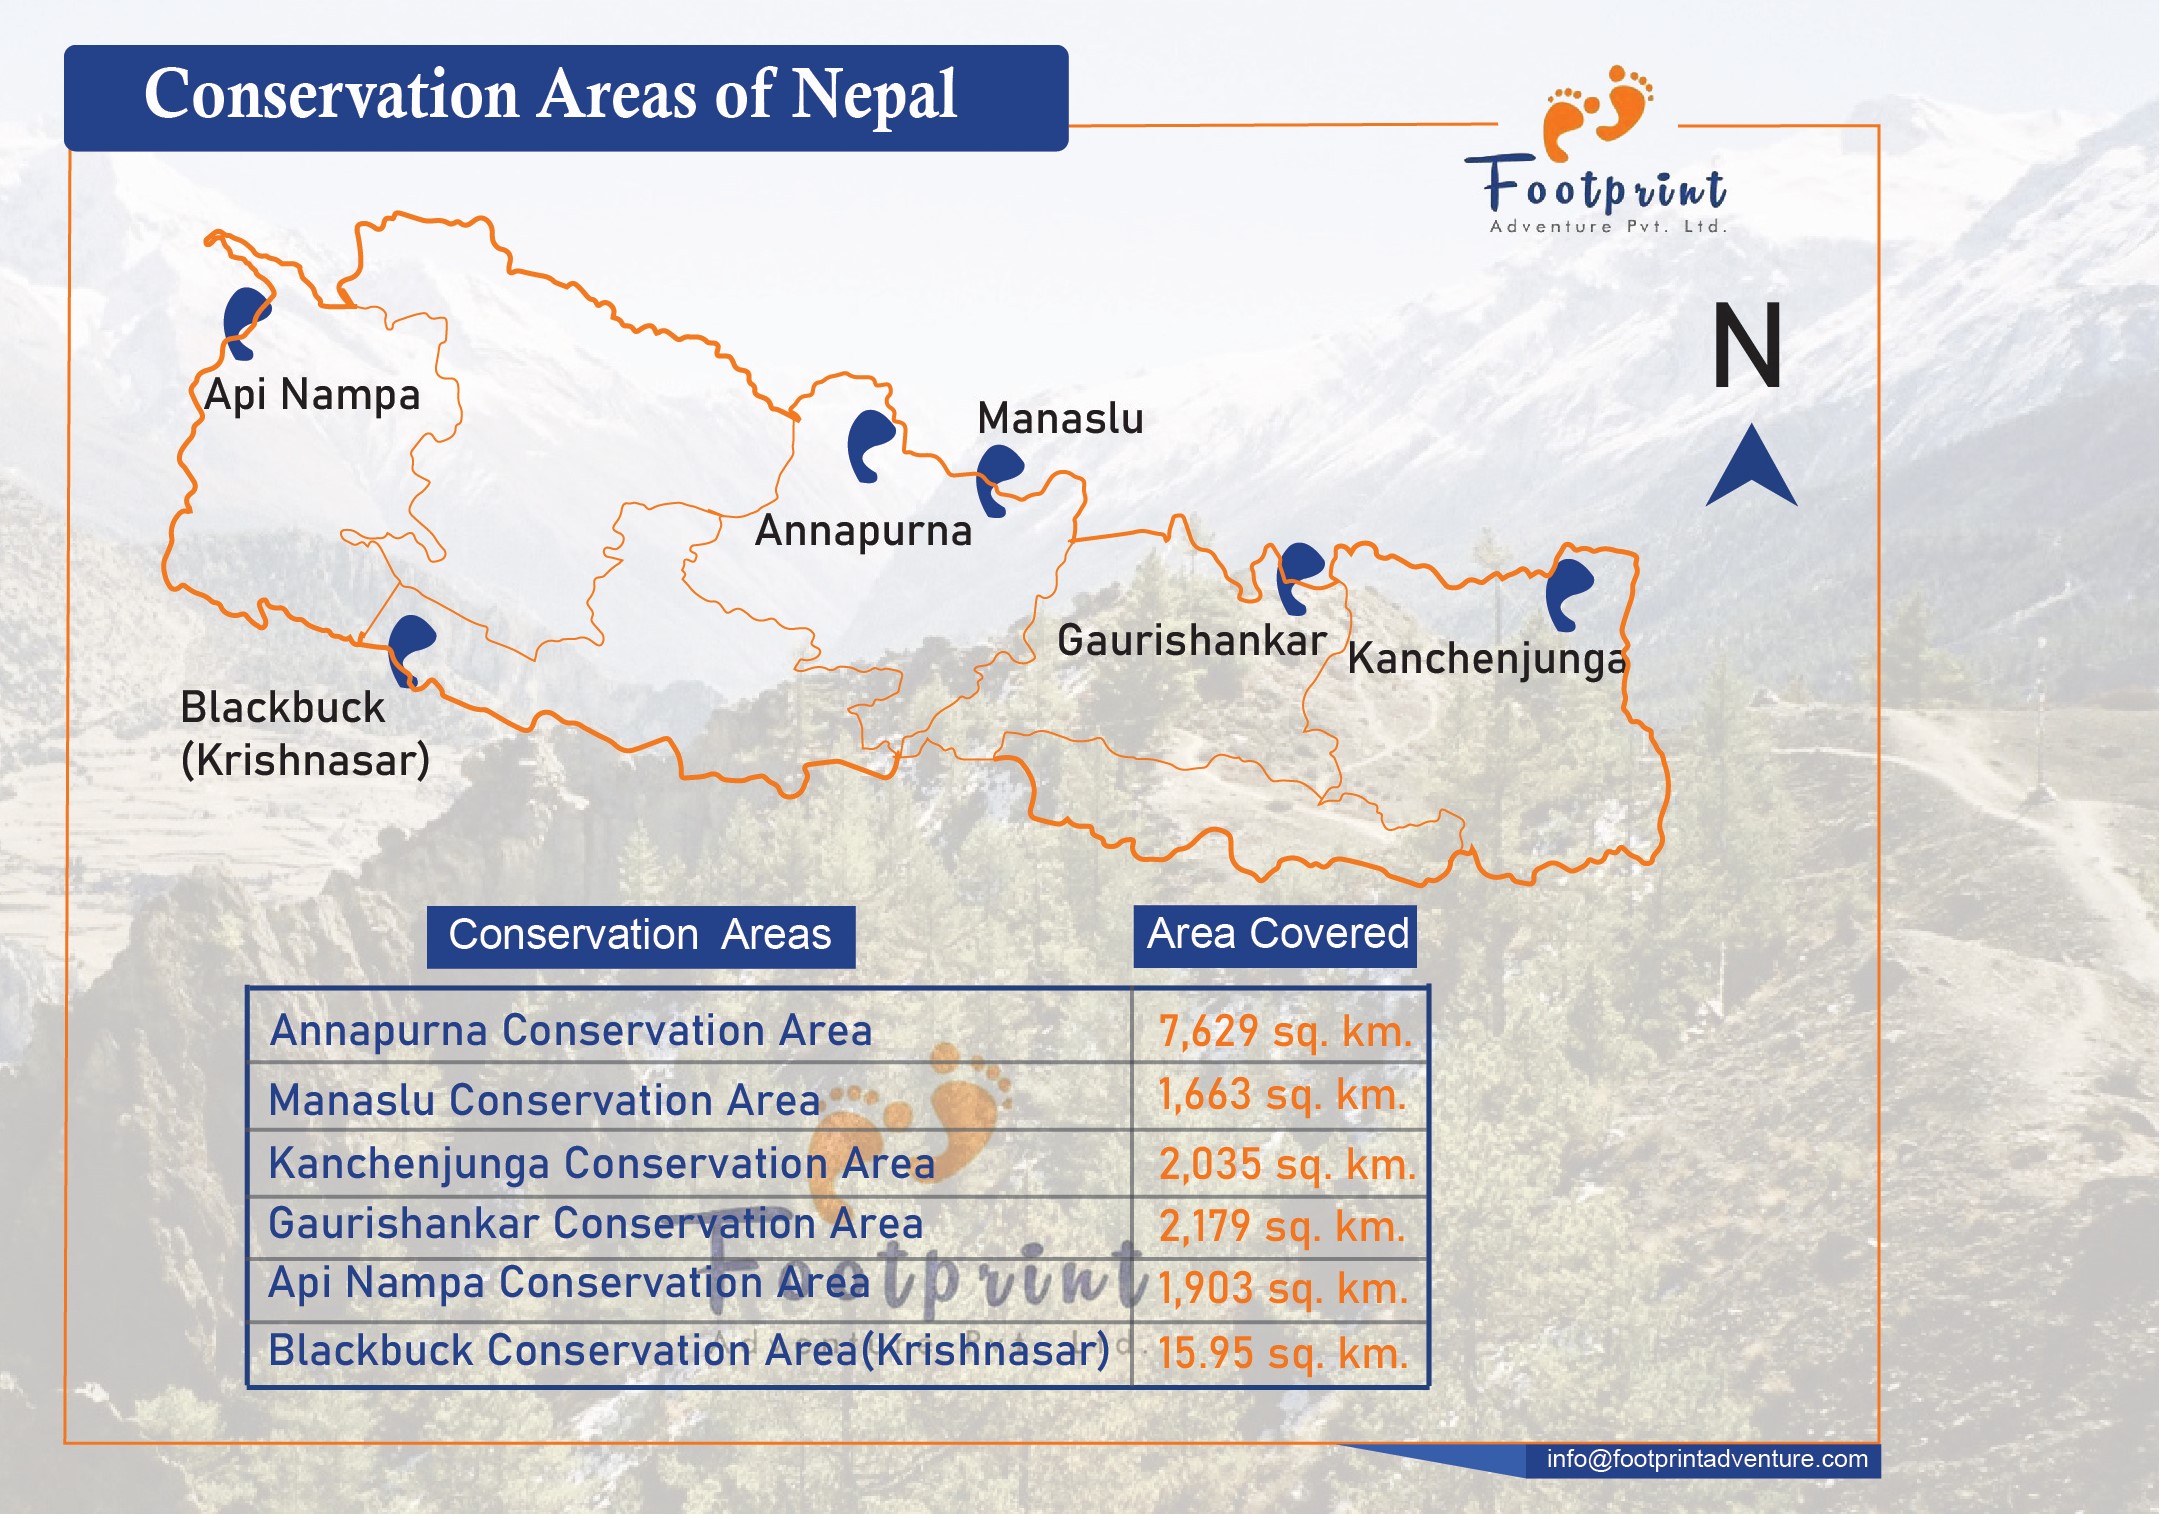 Conservation Areas of Nepal